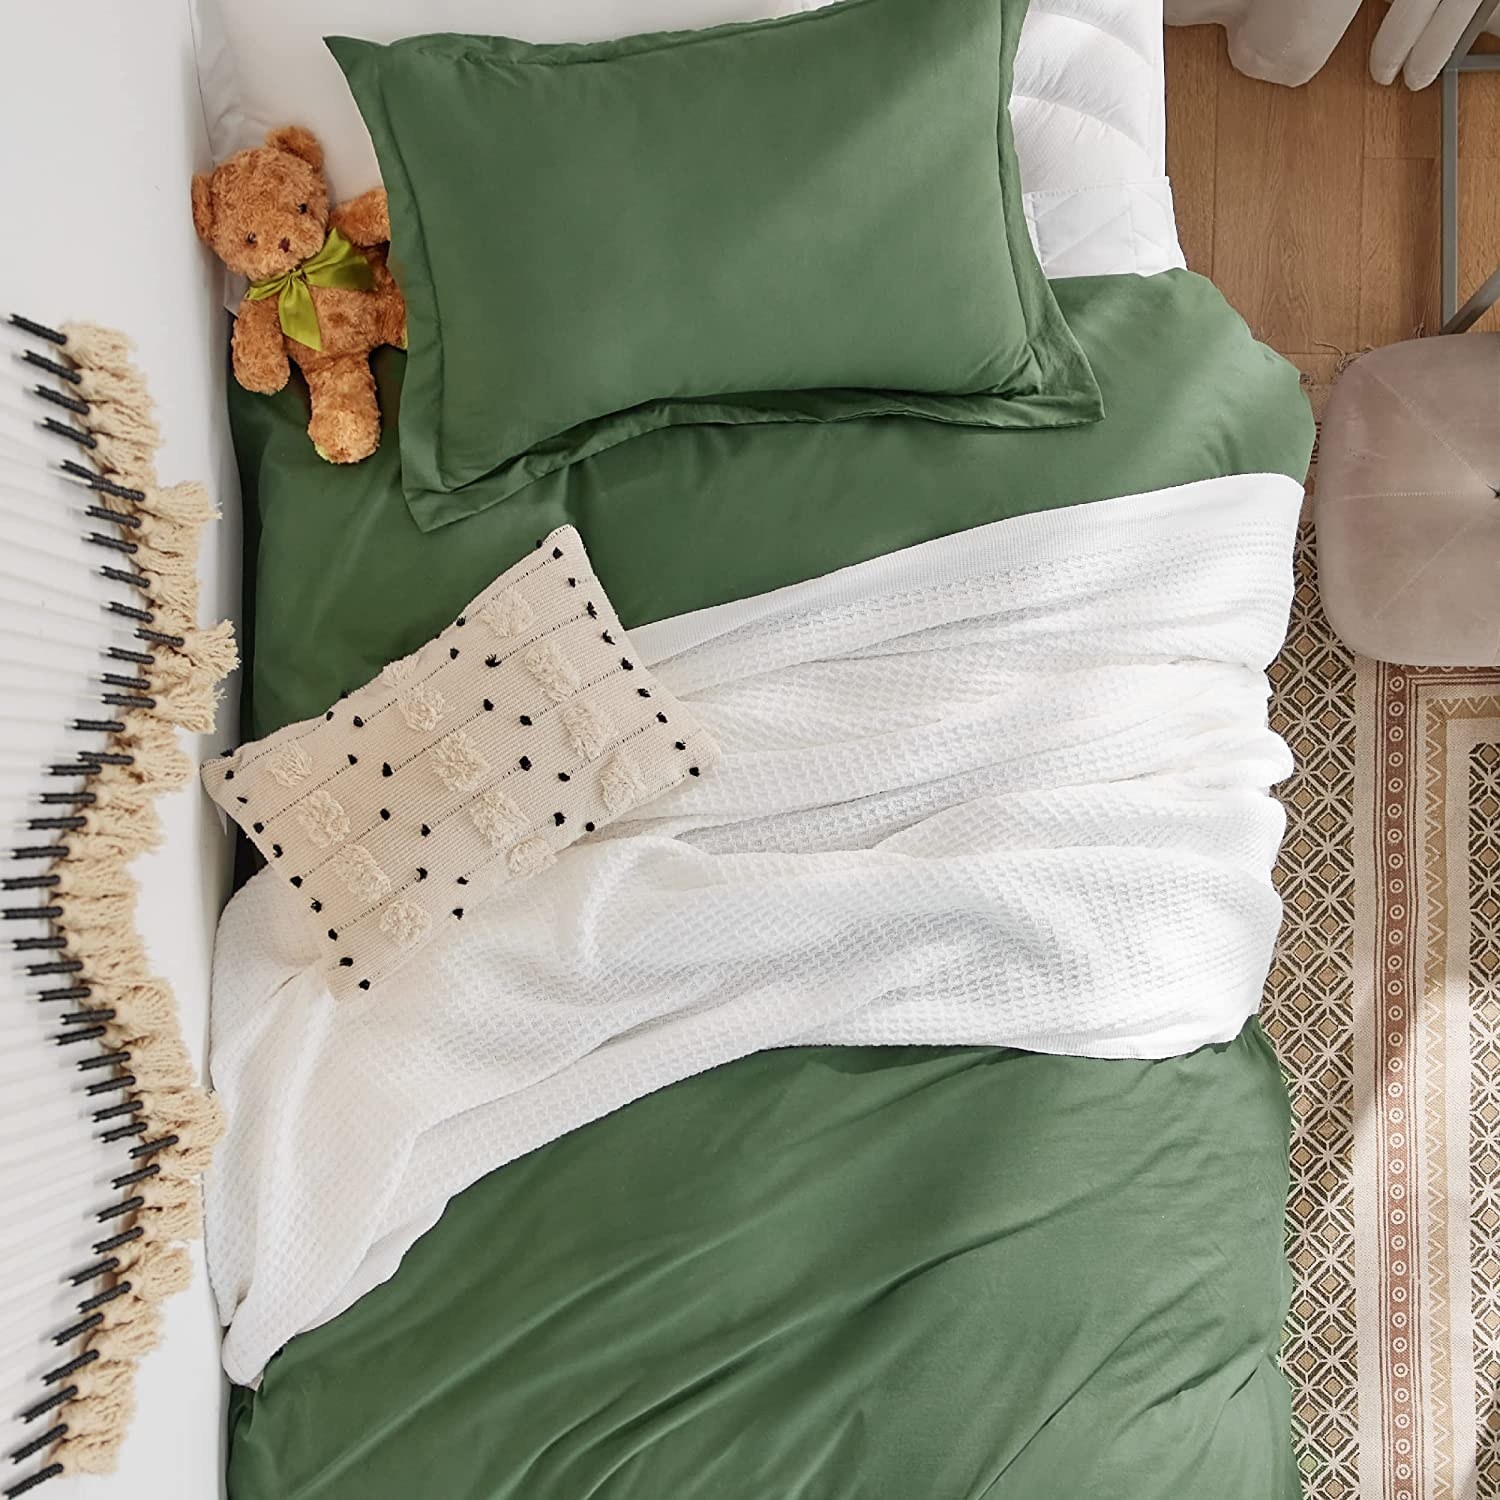 a white blanket on a green bed set